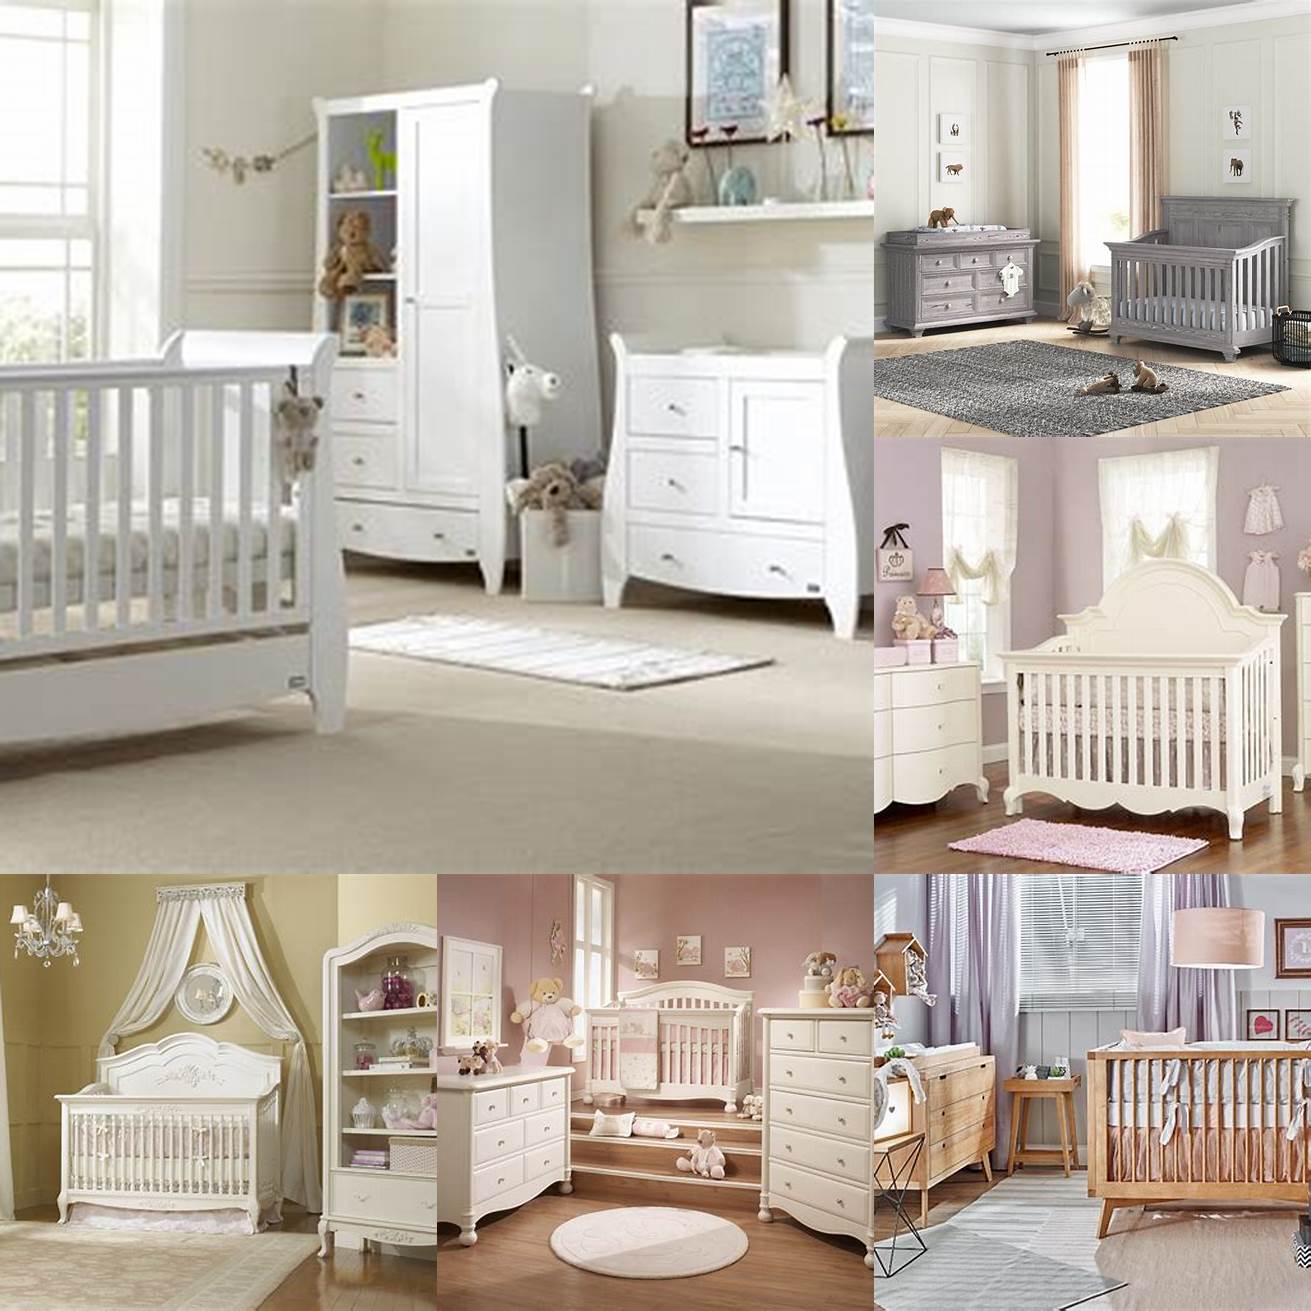 A baby furniture set can include matching accessories like a bookshelf or nightstand